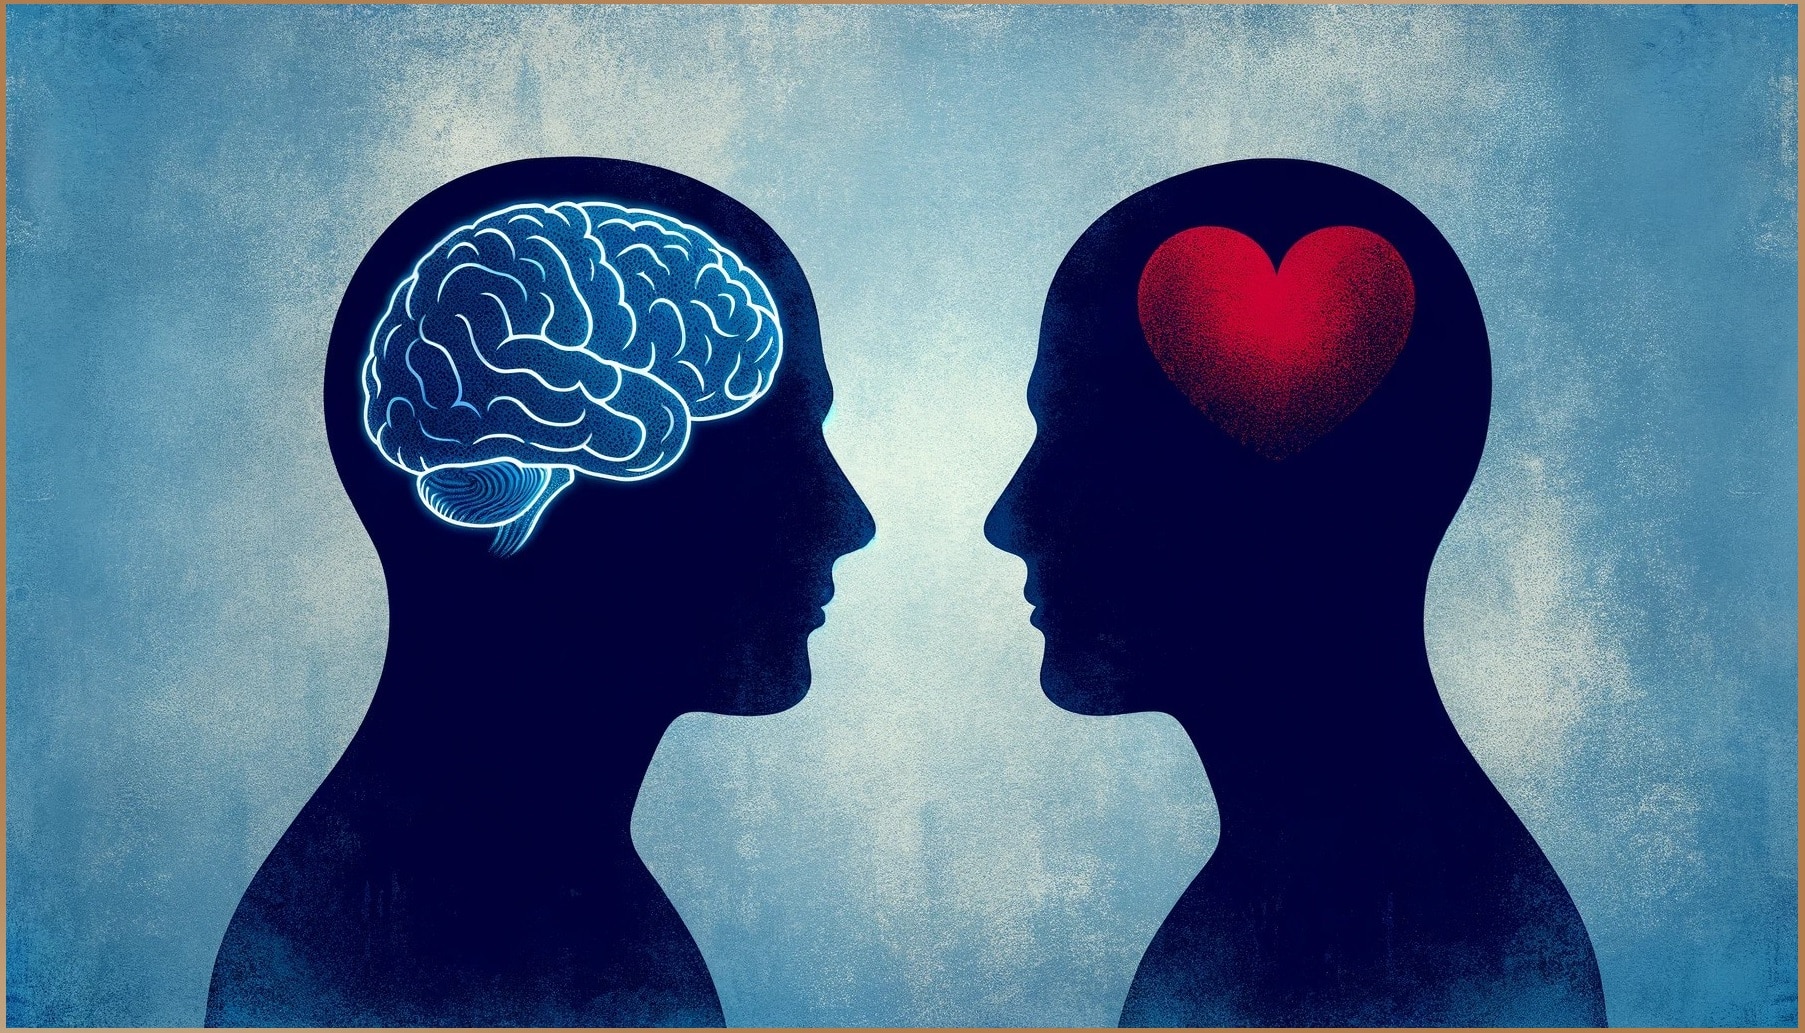 Two silhouettes with contrasting symbols of a brain and a heart in their heads facing each other against a textured blue background.